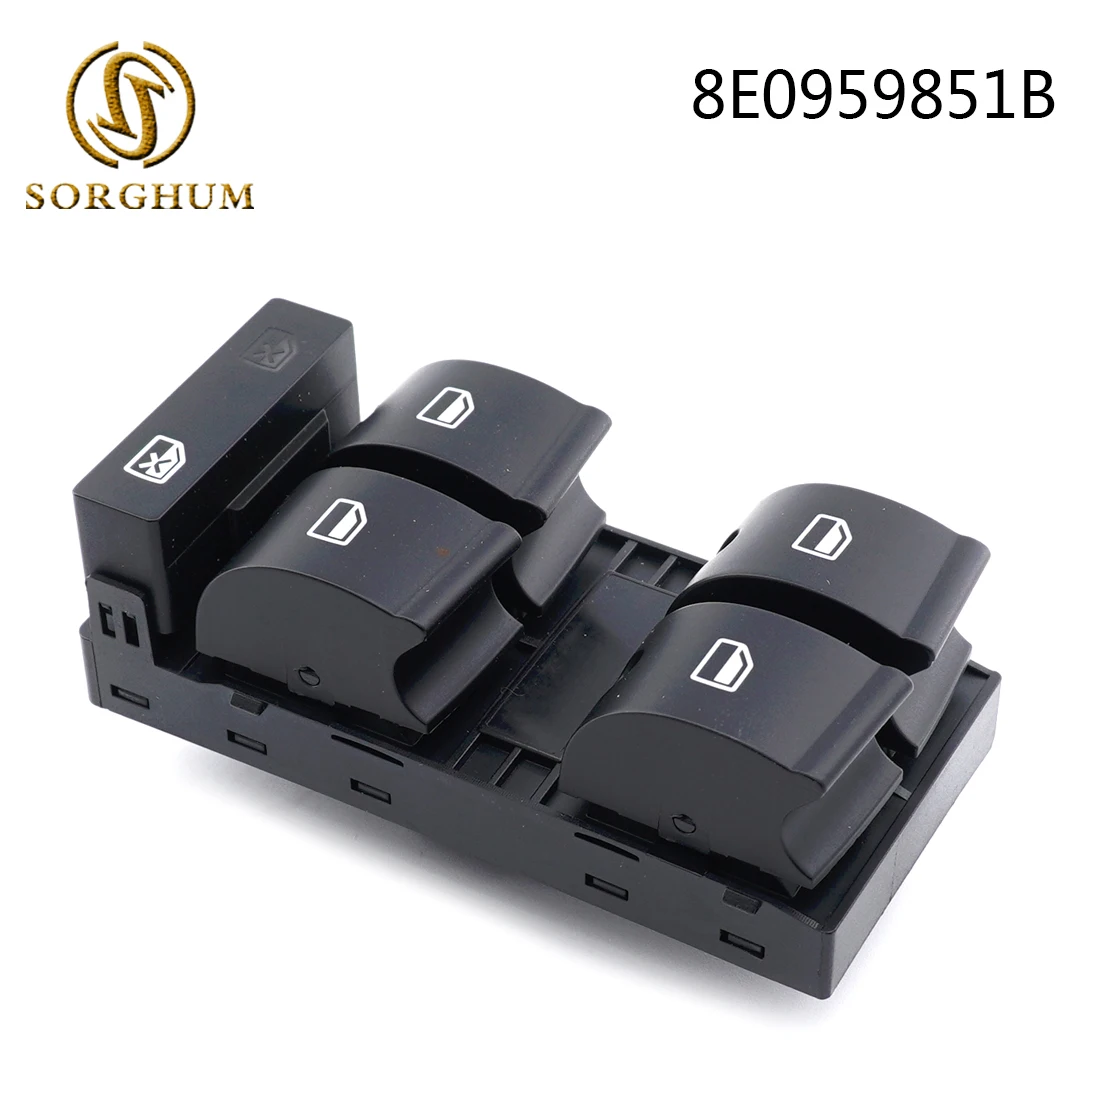 

SORGHUM New Electric Master Power Window Control Switch 8E0959851B For 2002-2008 Audi A4 S4 B6 B7 RS4 8ED 959851D 8ED959851